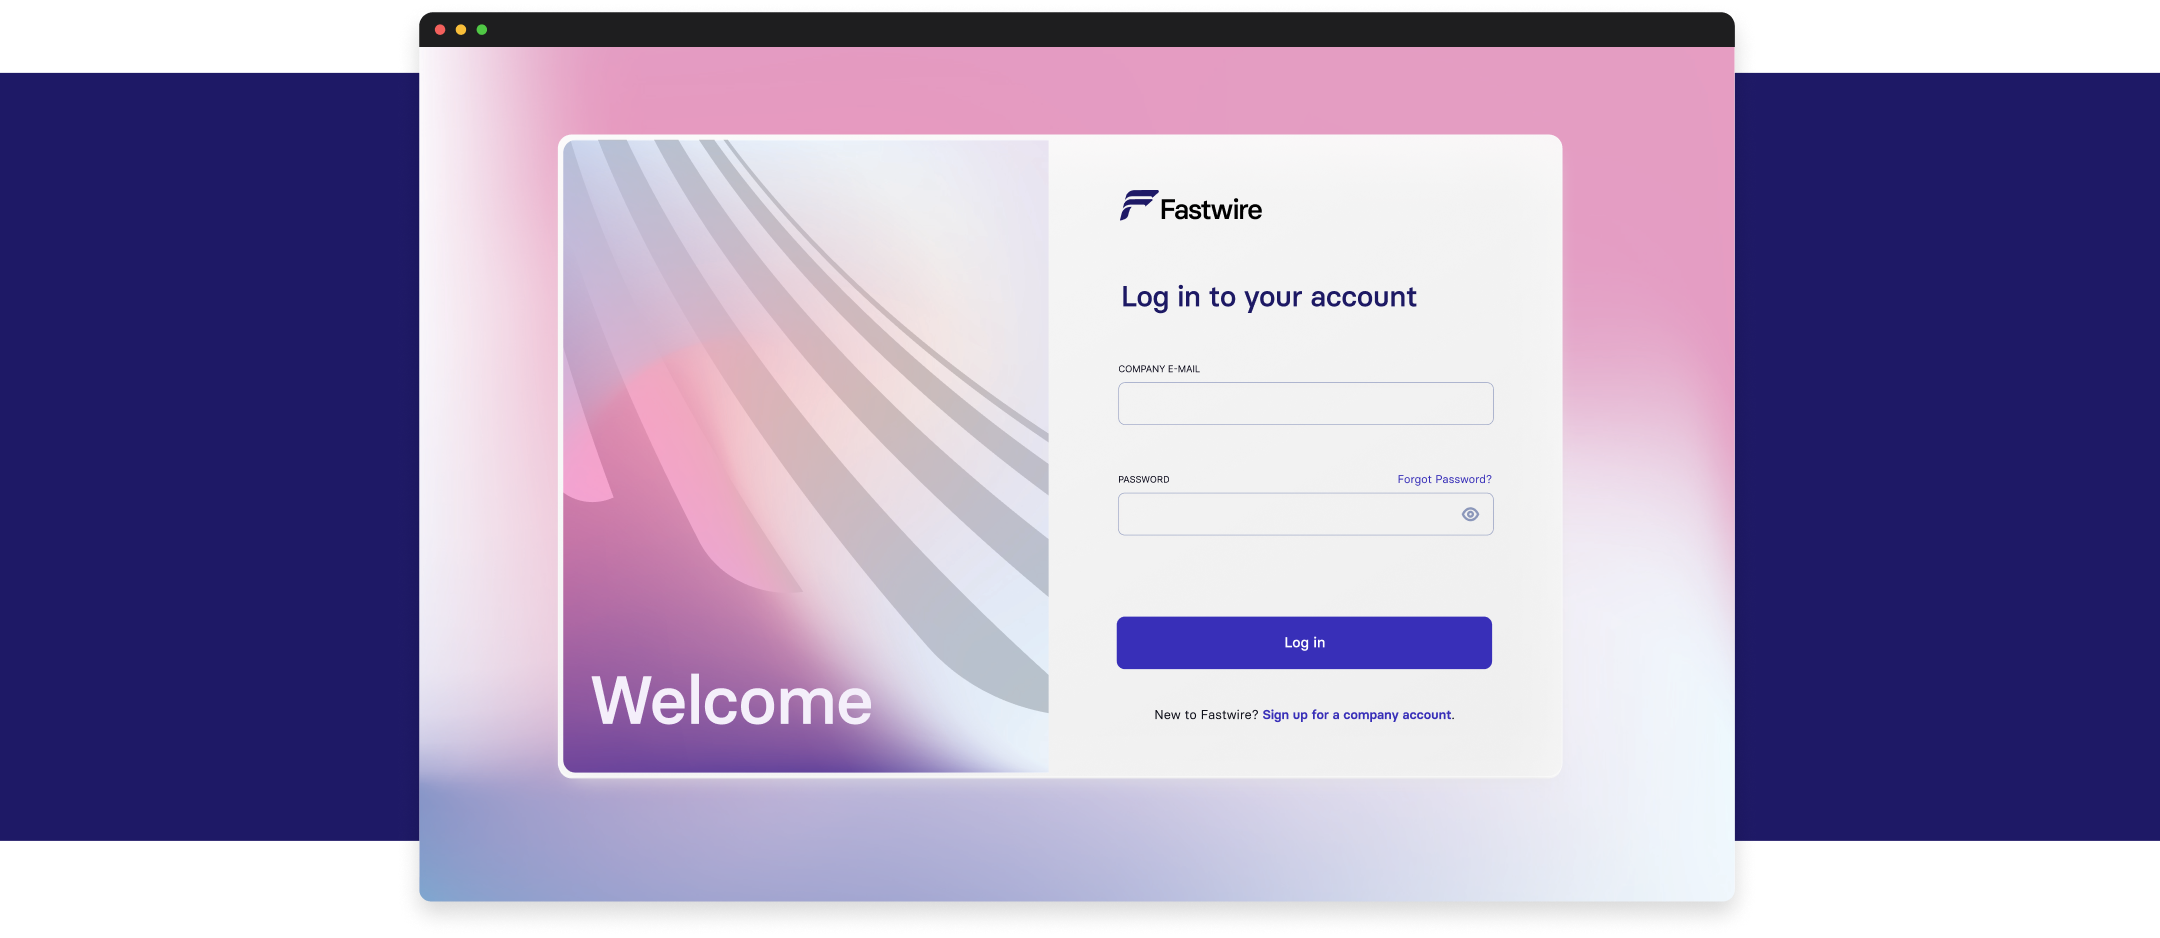 The login screen for Fastwire with a soft pink and purple colored theme with email and password inputs and the login button.